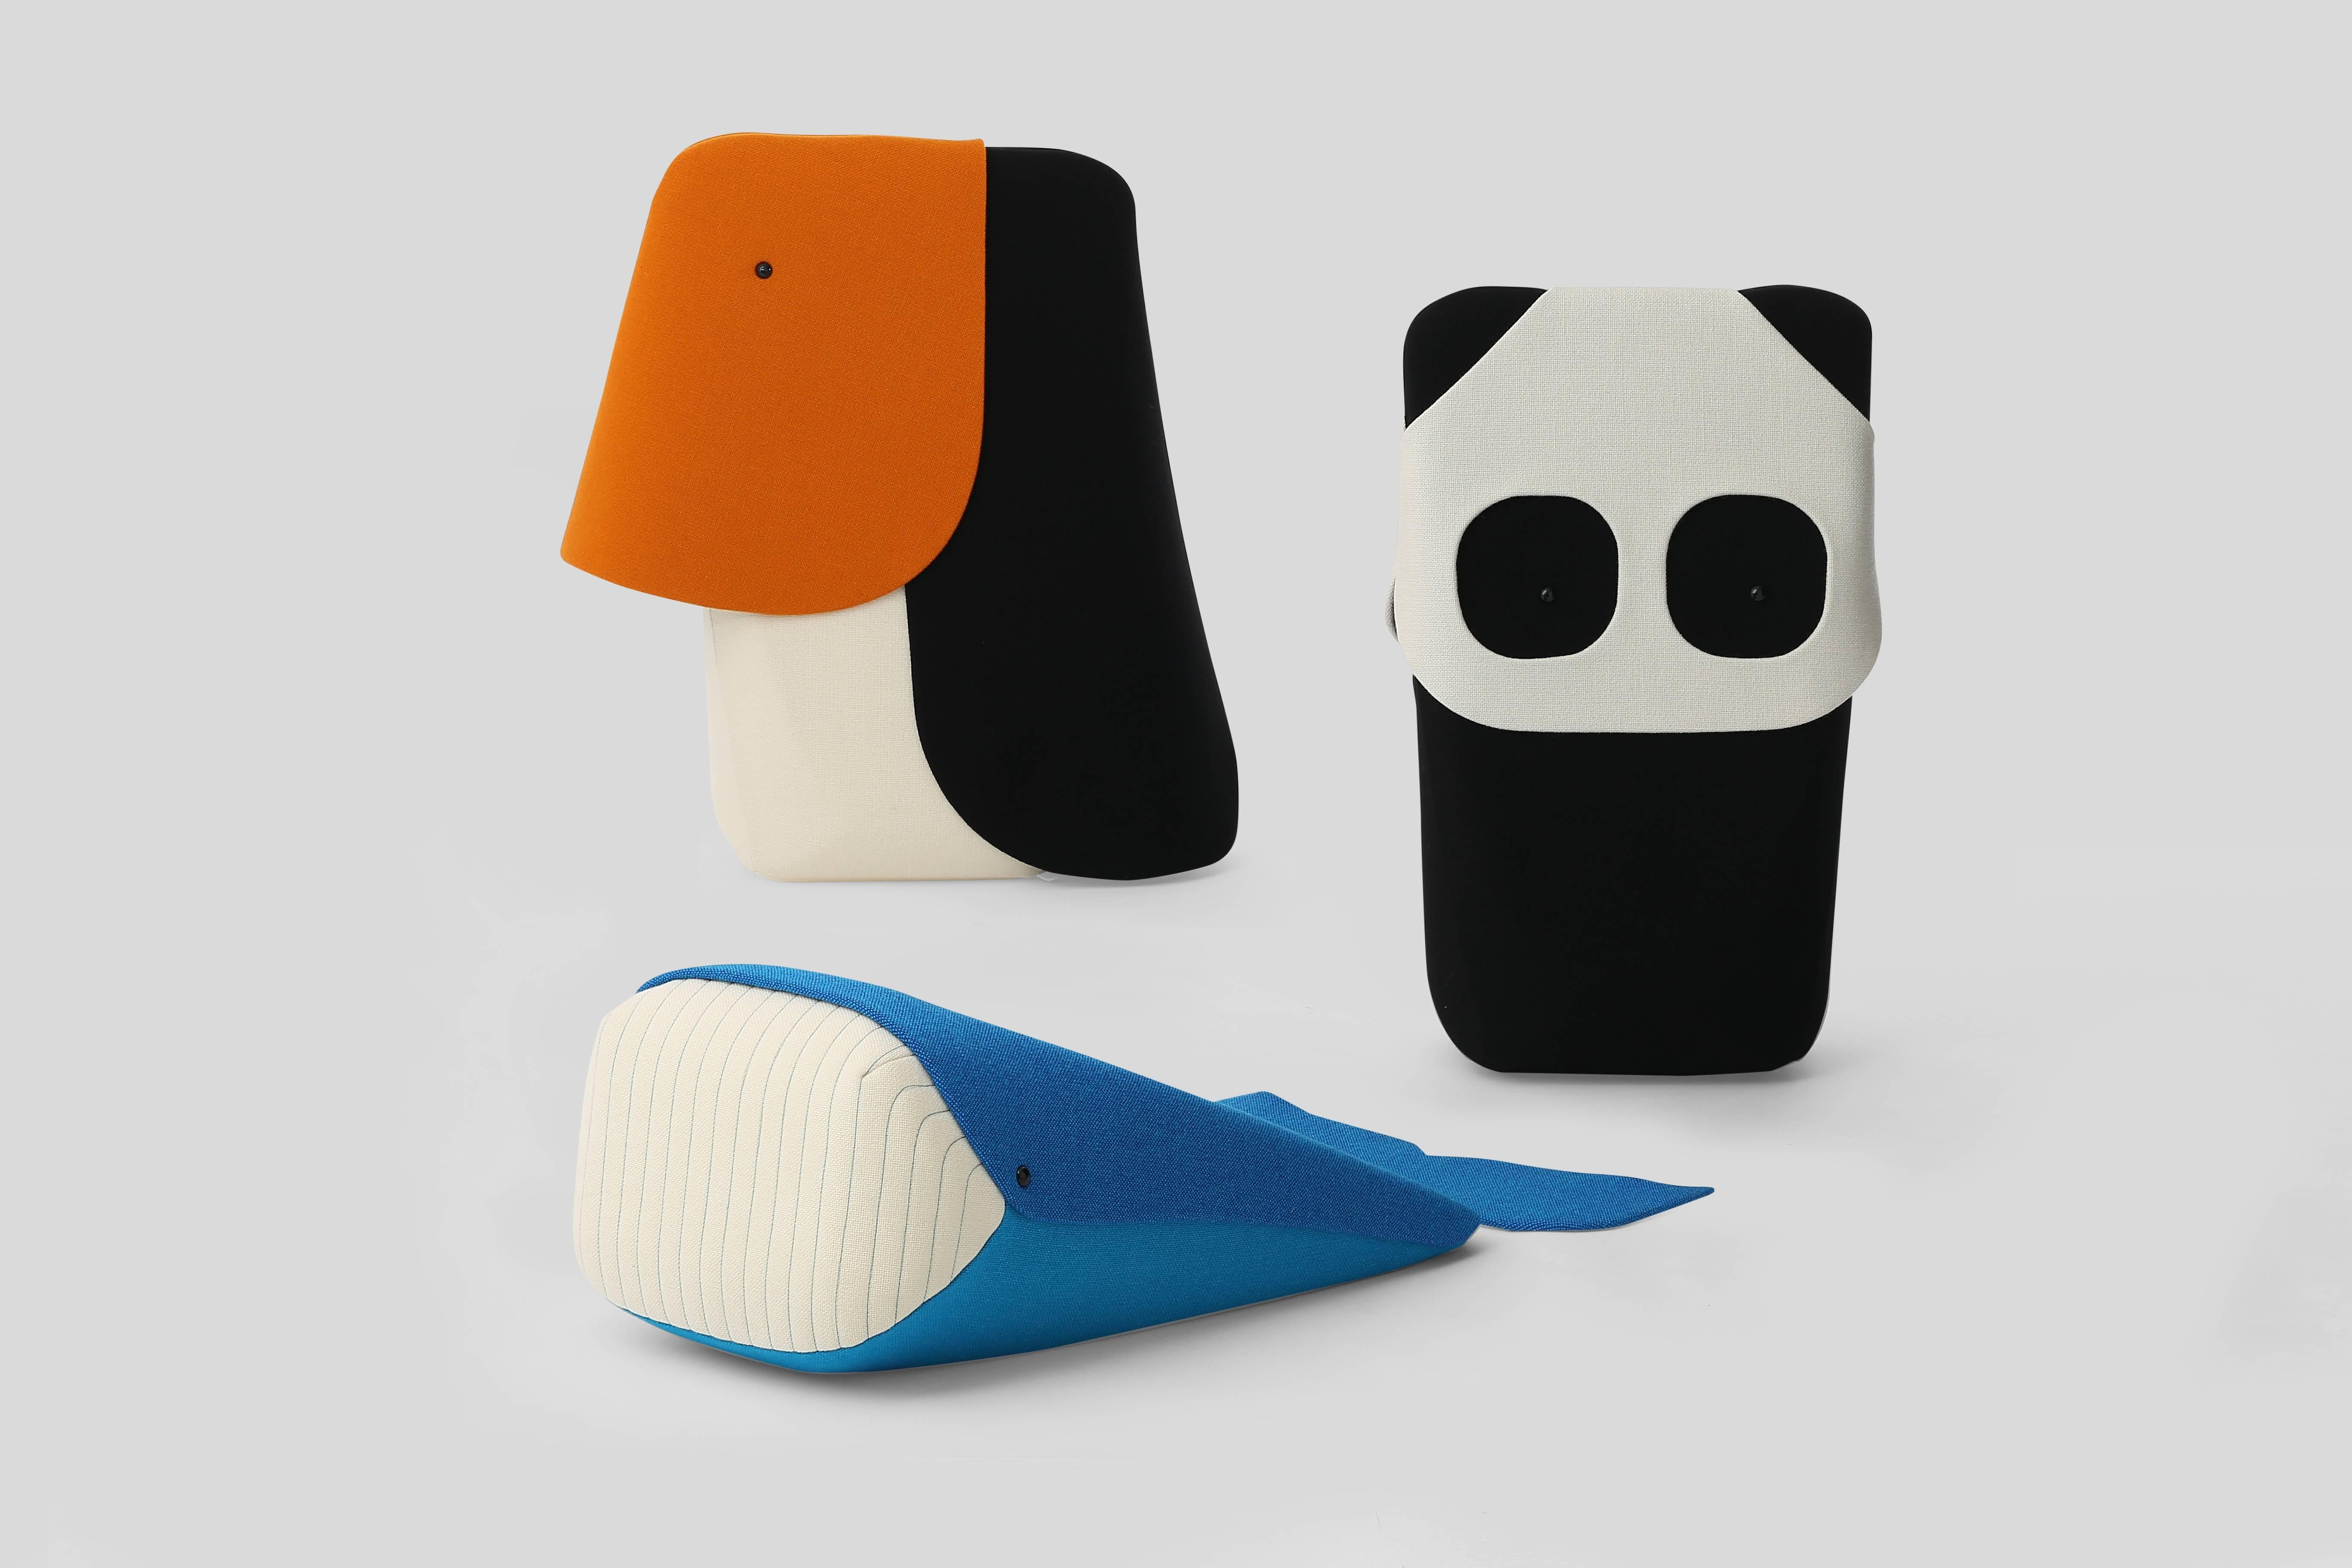 Zoo Collection, Panda by Ionna Vautrin for EO

Designed by Ionna Vautrin
Produced by EO
Contemporary, Denmark, 2016
Hallingdal 65 textile from Kvadrat, foam
Measures: L 17.75 in, W 13 in, H 31.5 in

6-8 week lead time.
 